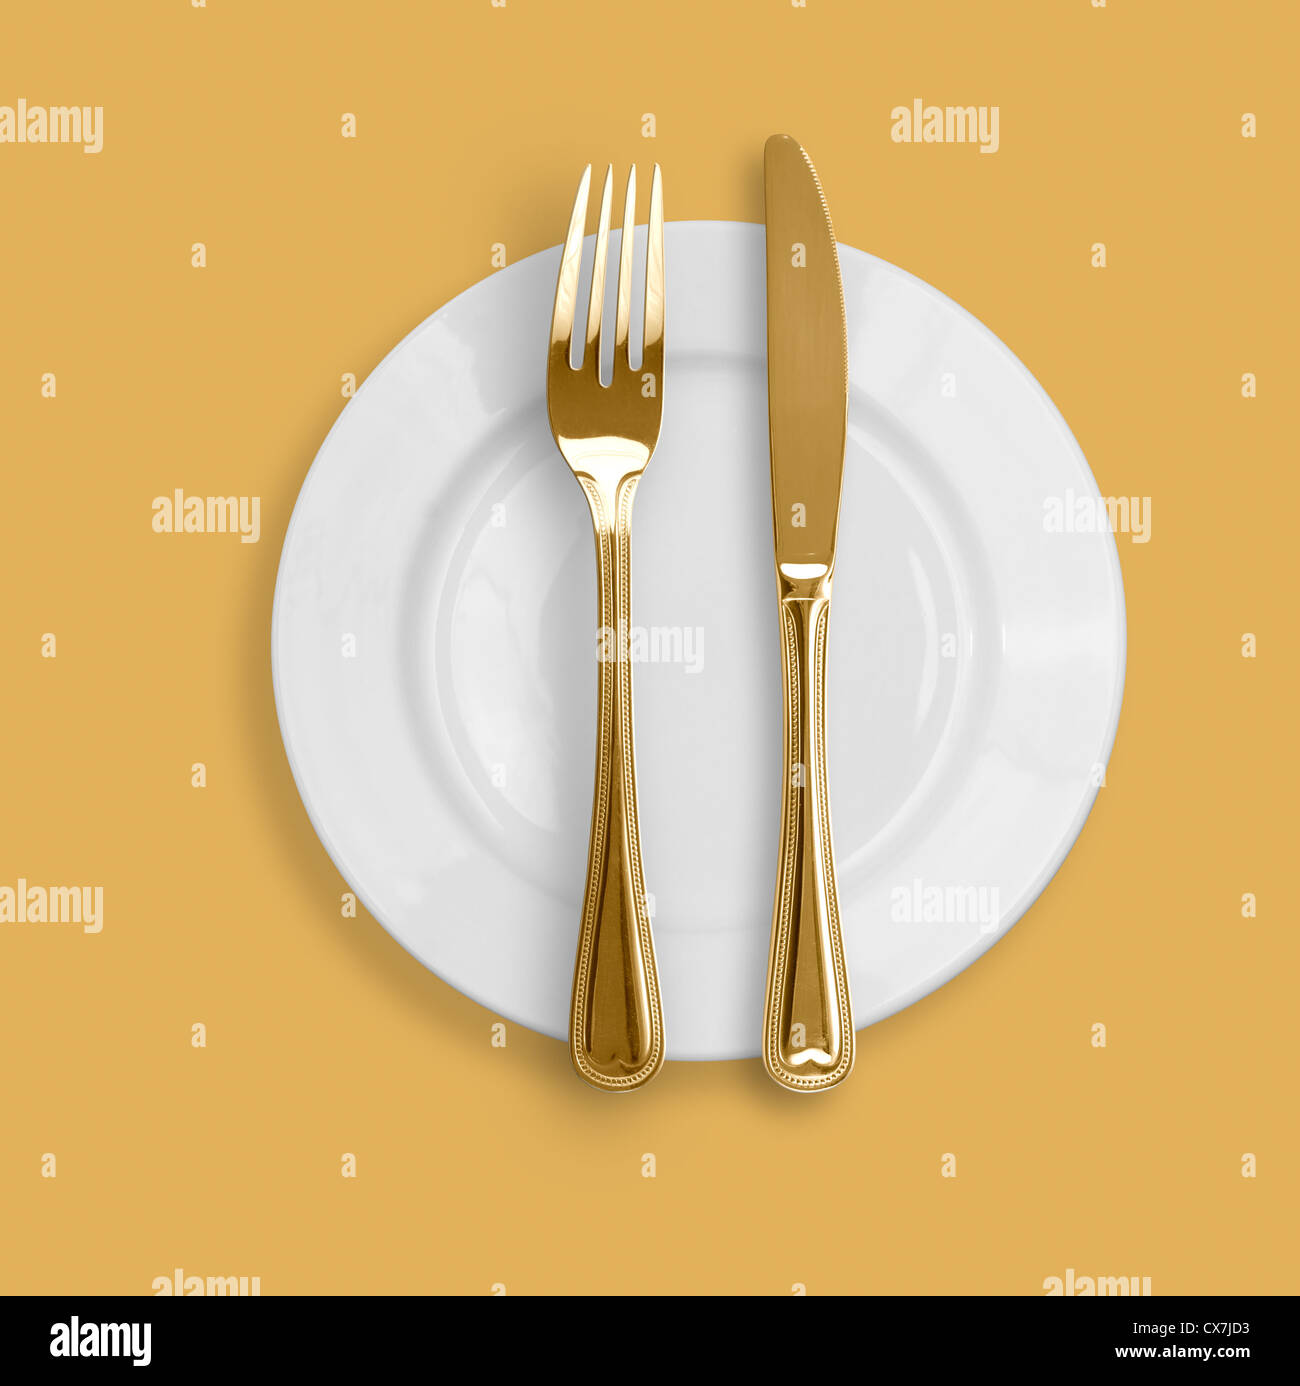 Knife, plate and fork on beige background Stock Photo